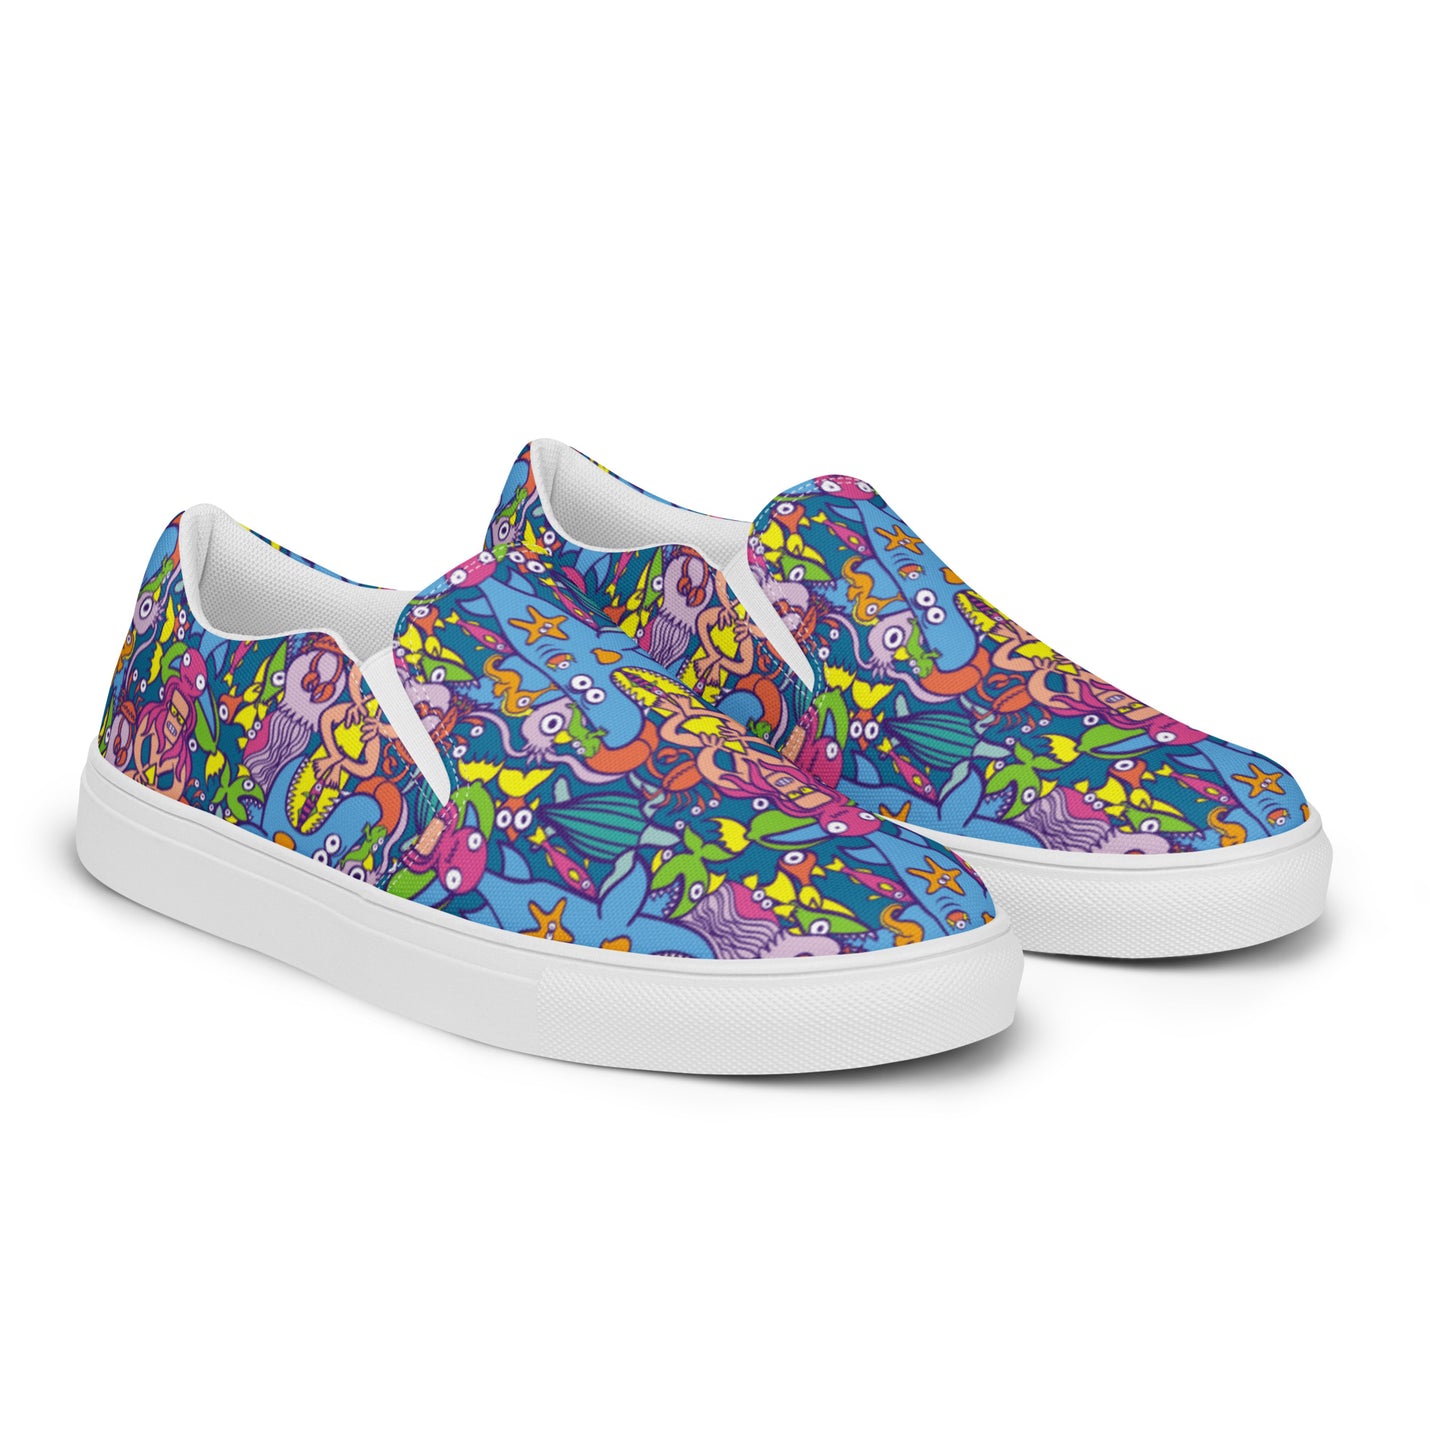 Surf is a true extreme sport Women’s slip-on canvas shoes. Overview